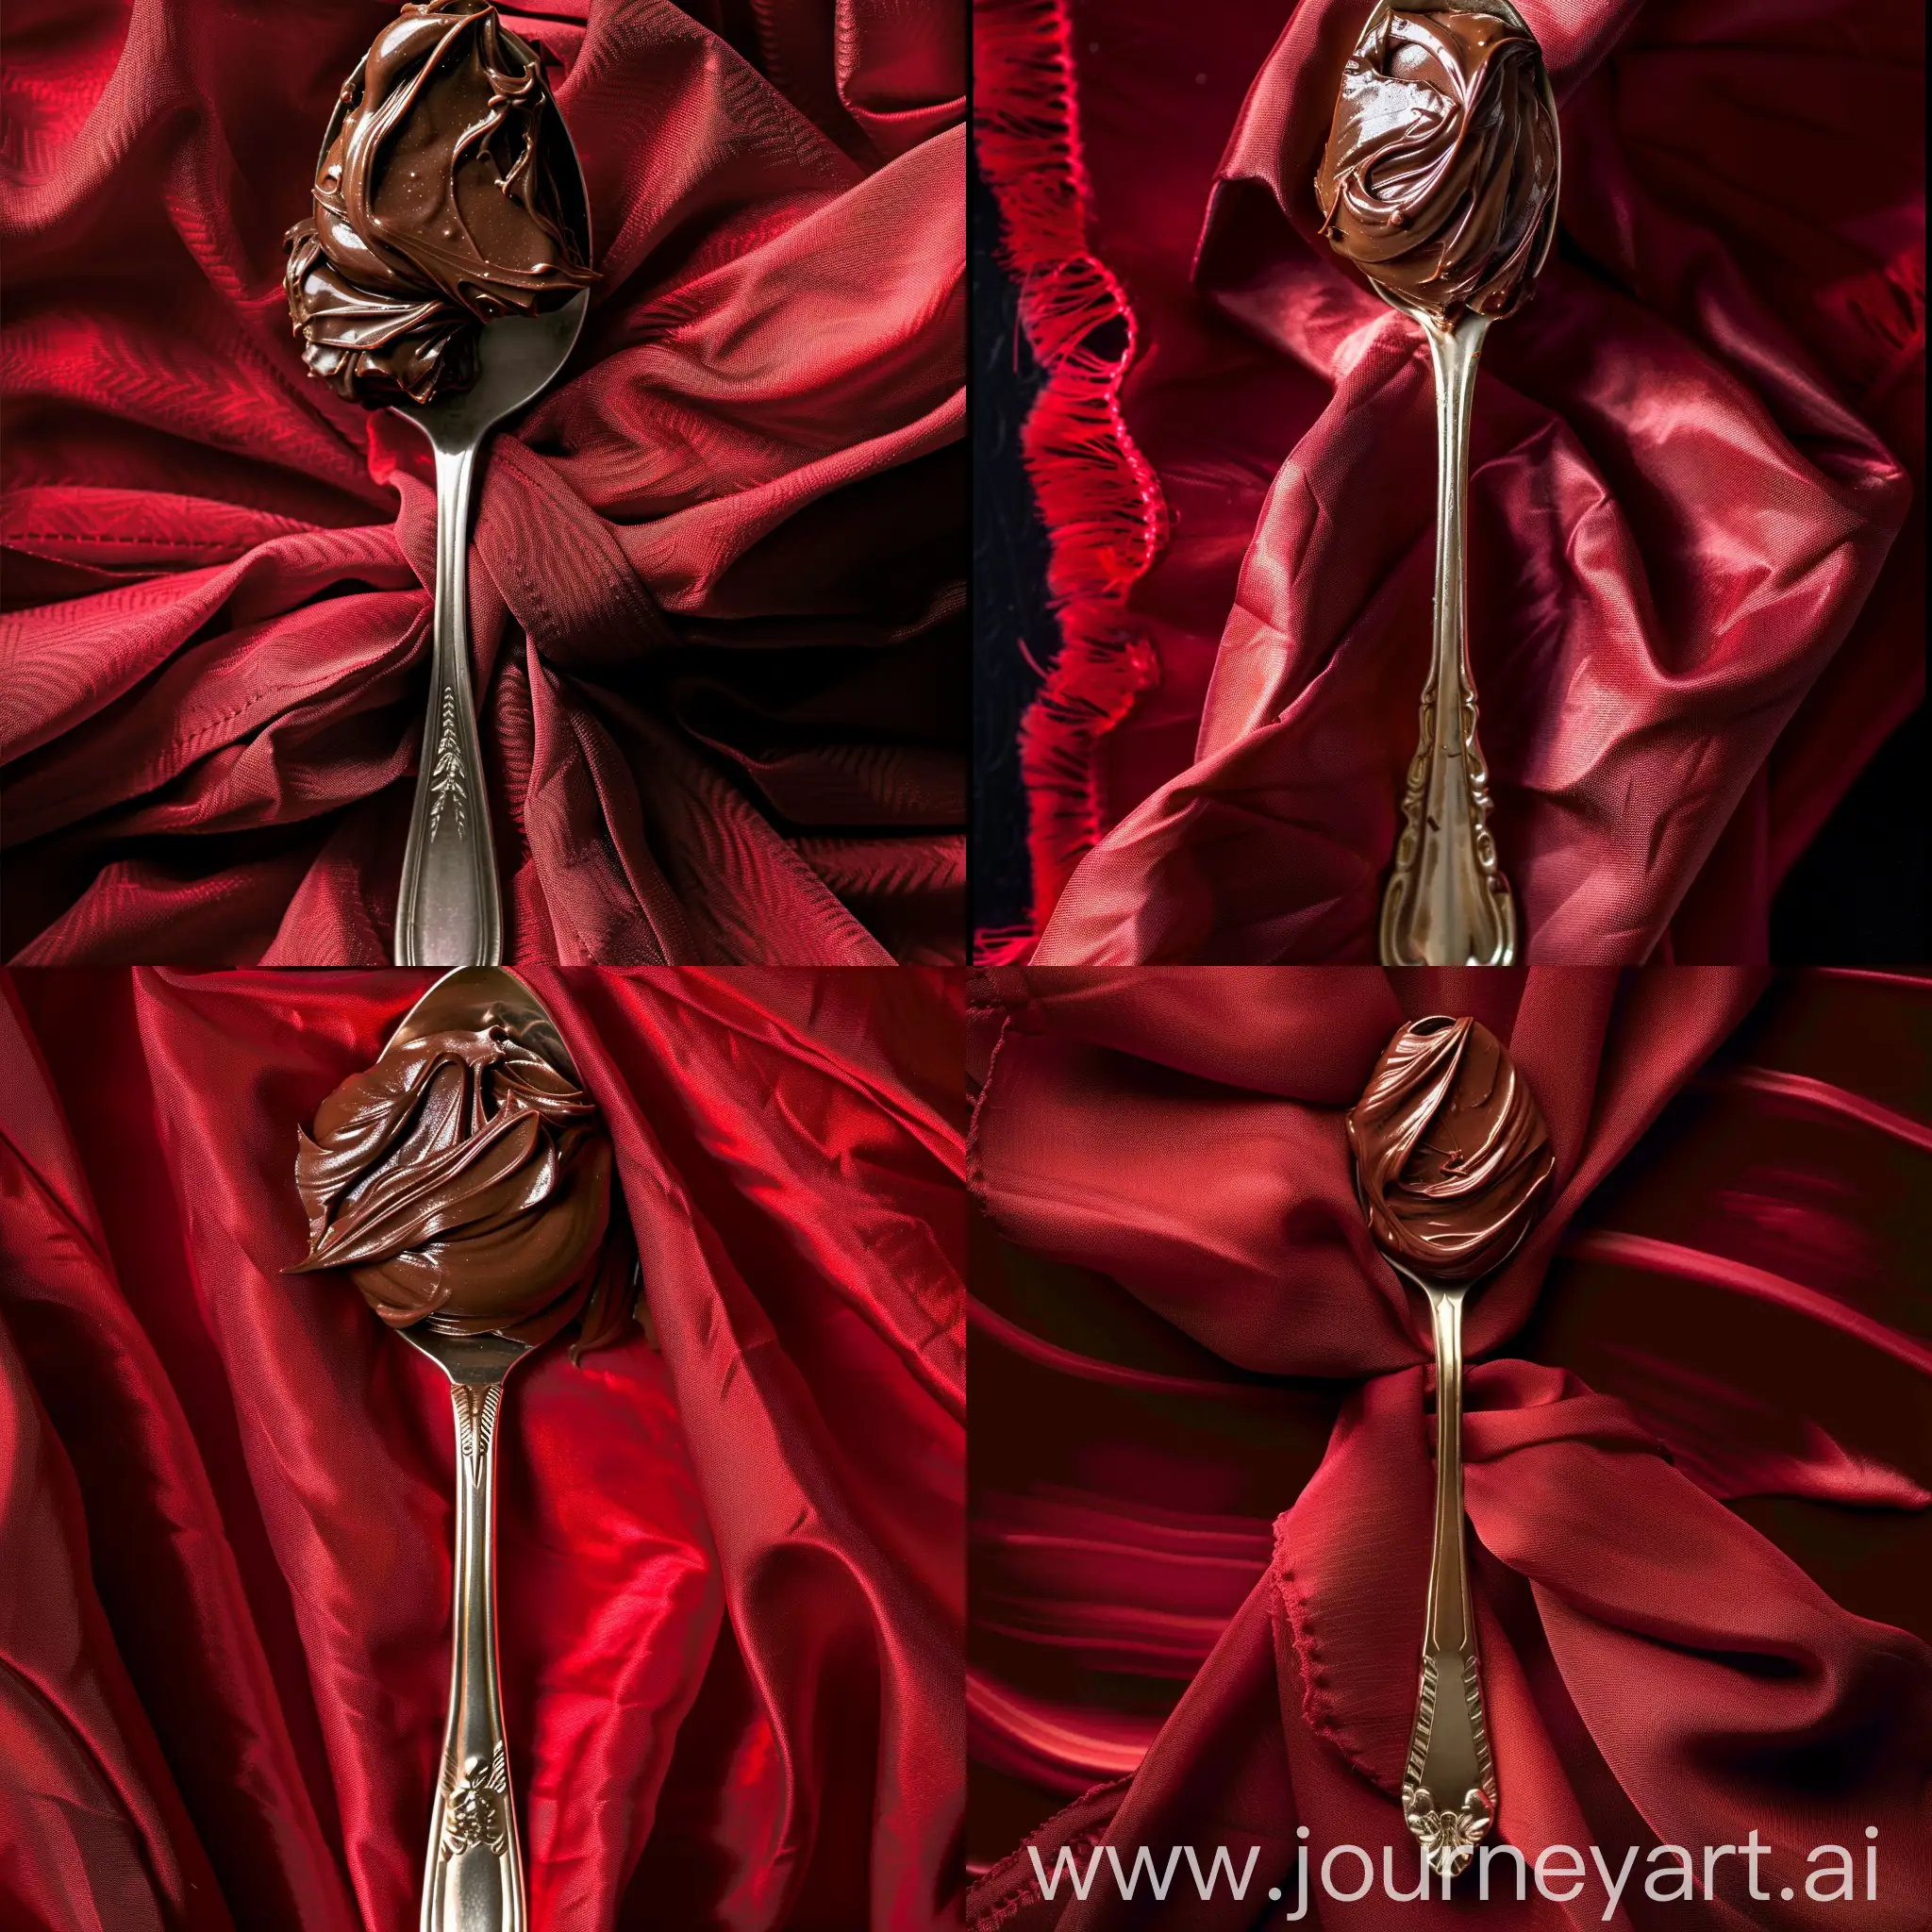 Luxurious-Nutella-Spoon-Resting-on-Red-Handkerchief